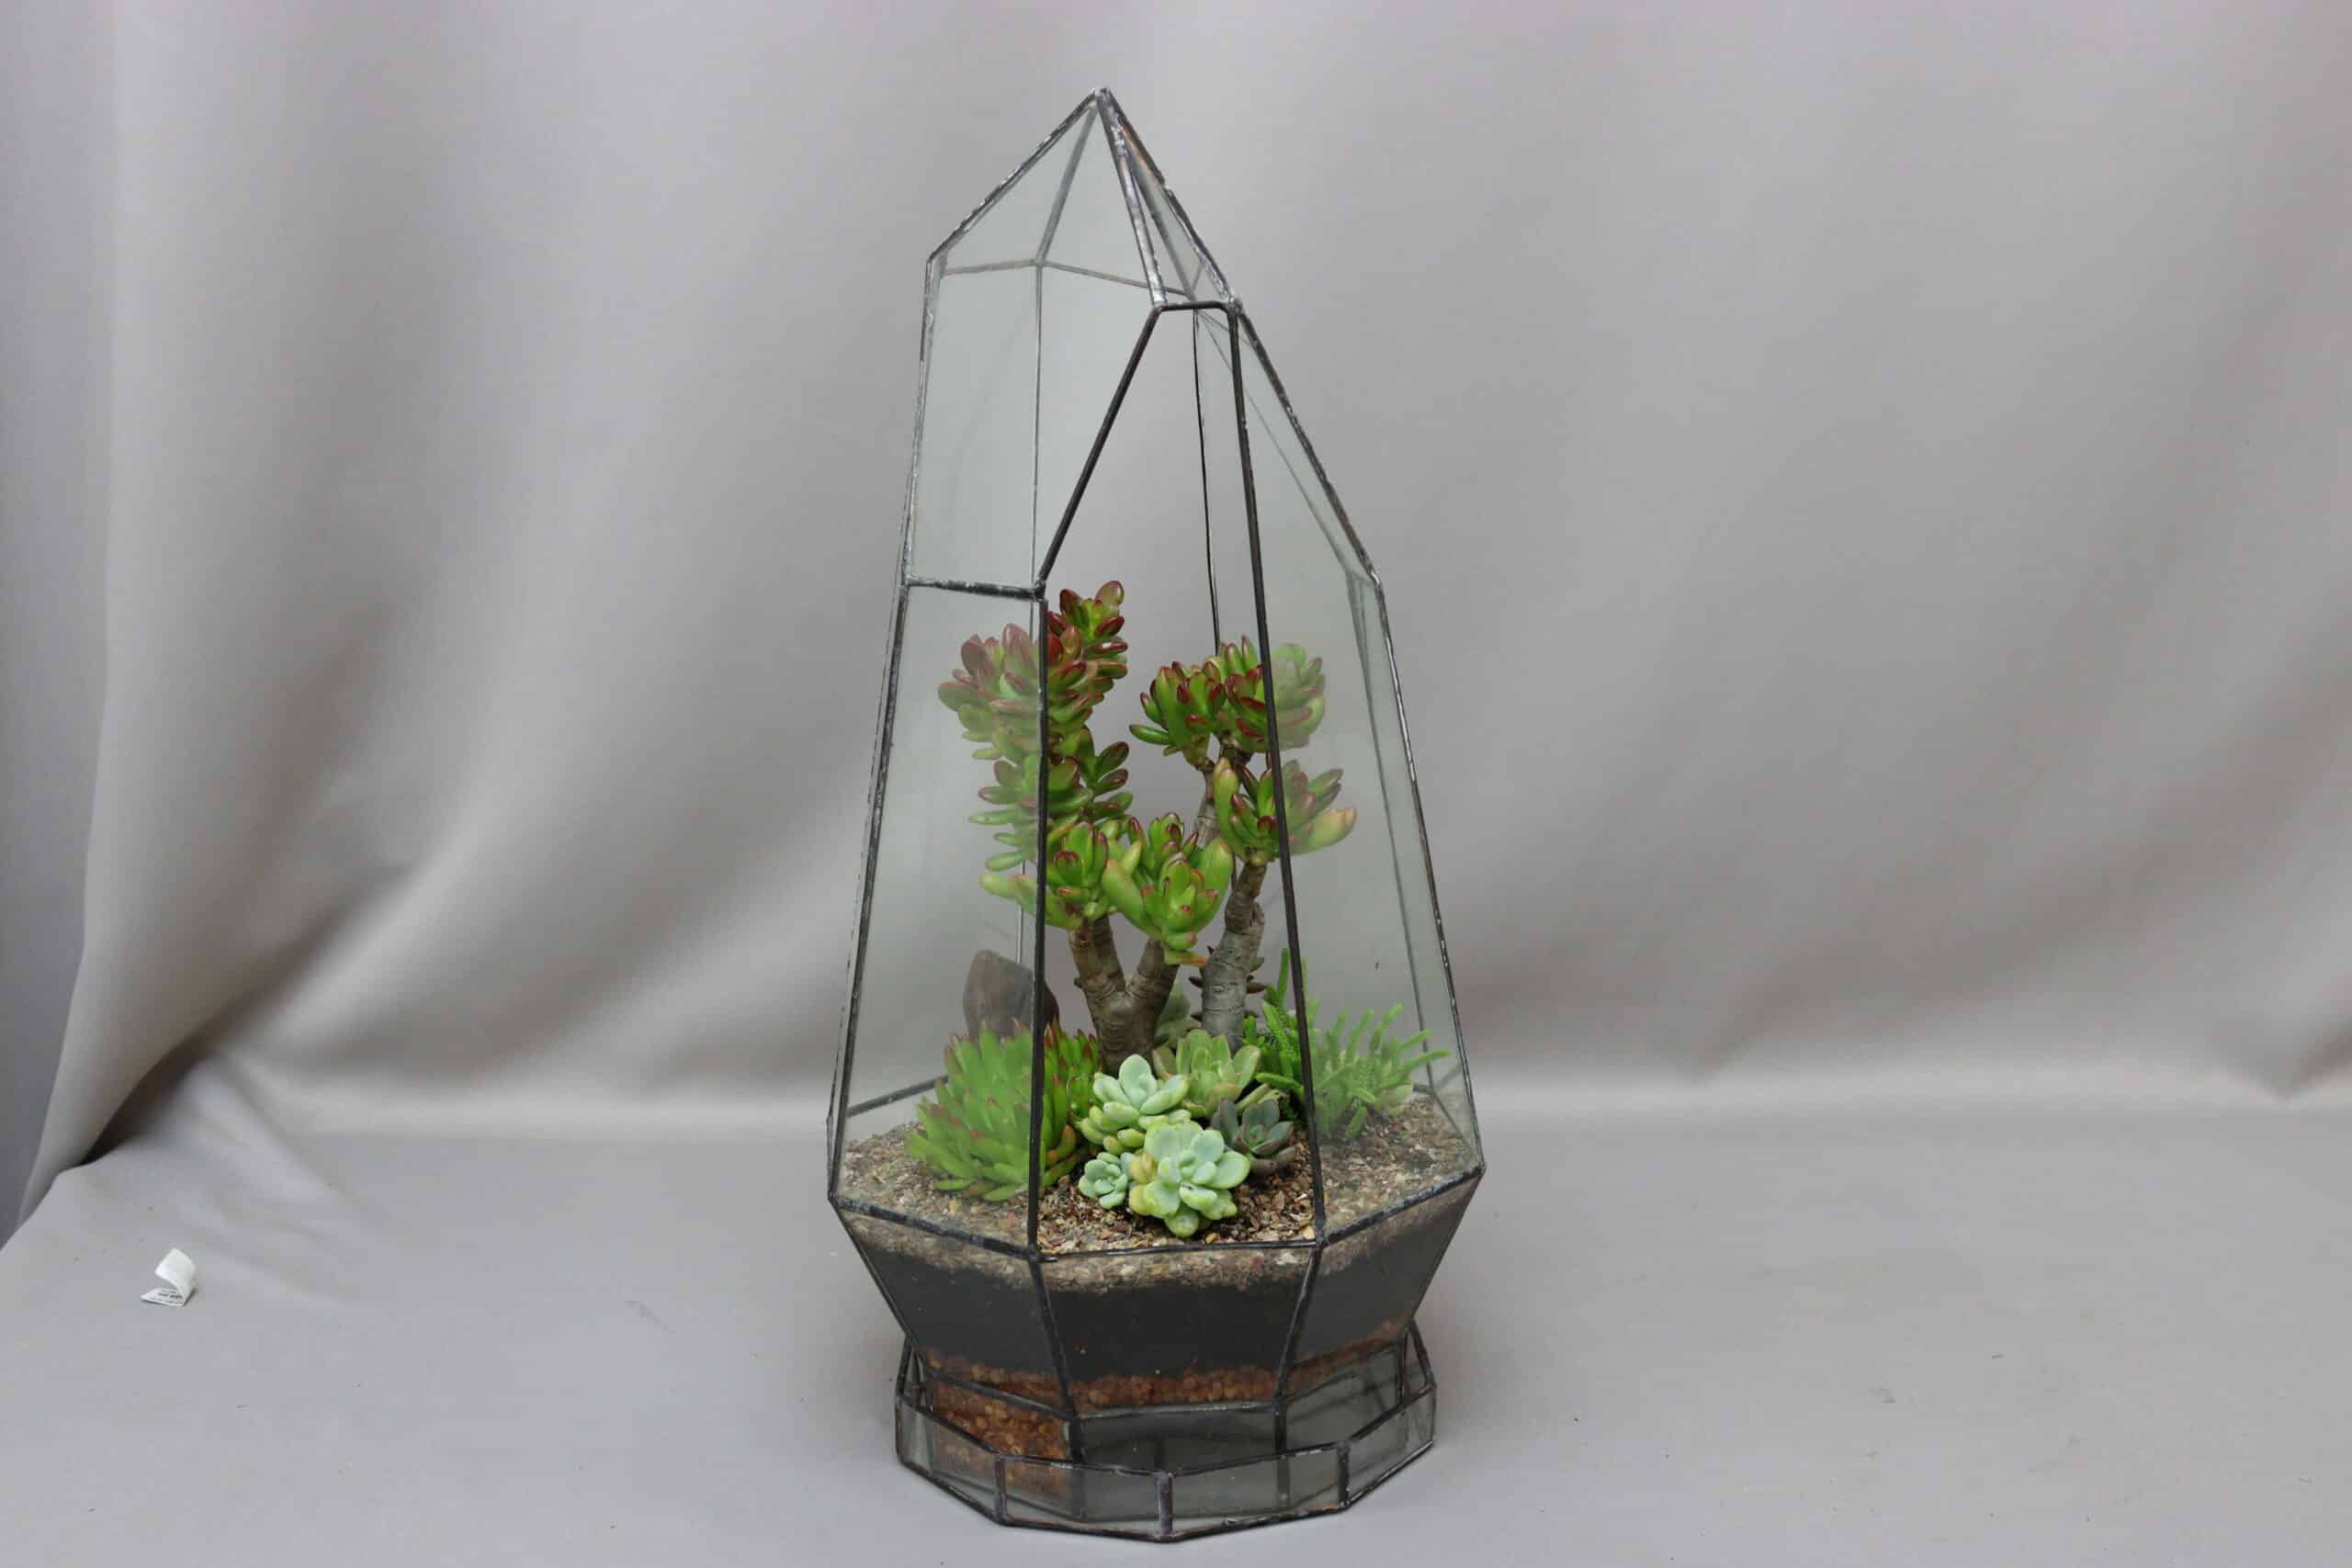 A medium geometric-inspired glass and brass terrarium with assorted succulents inside against a plain grey background.